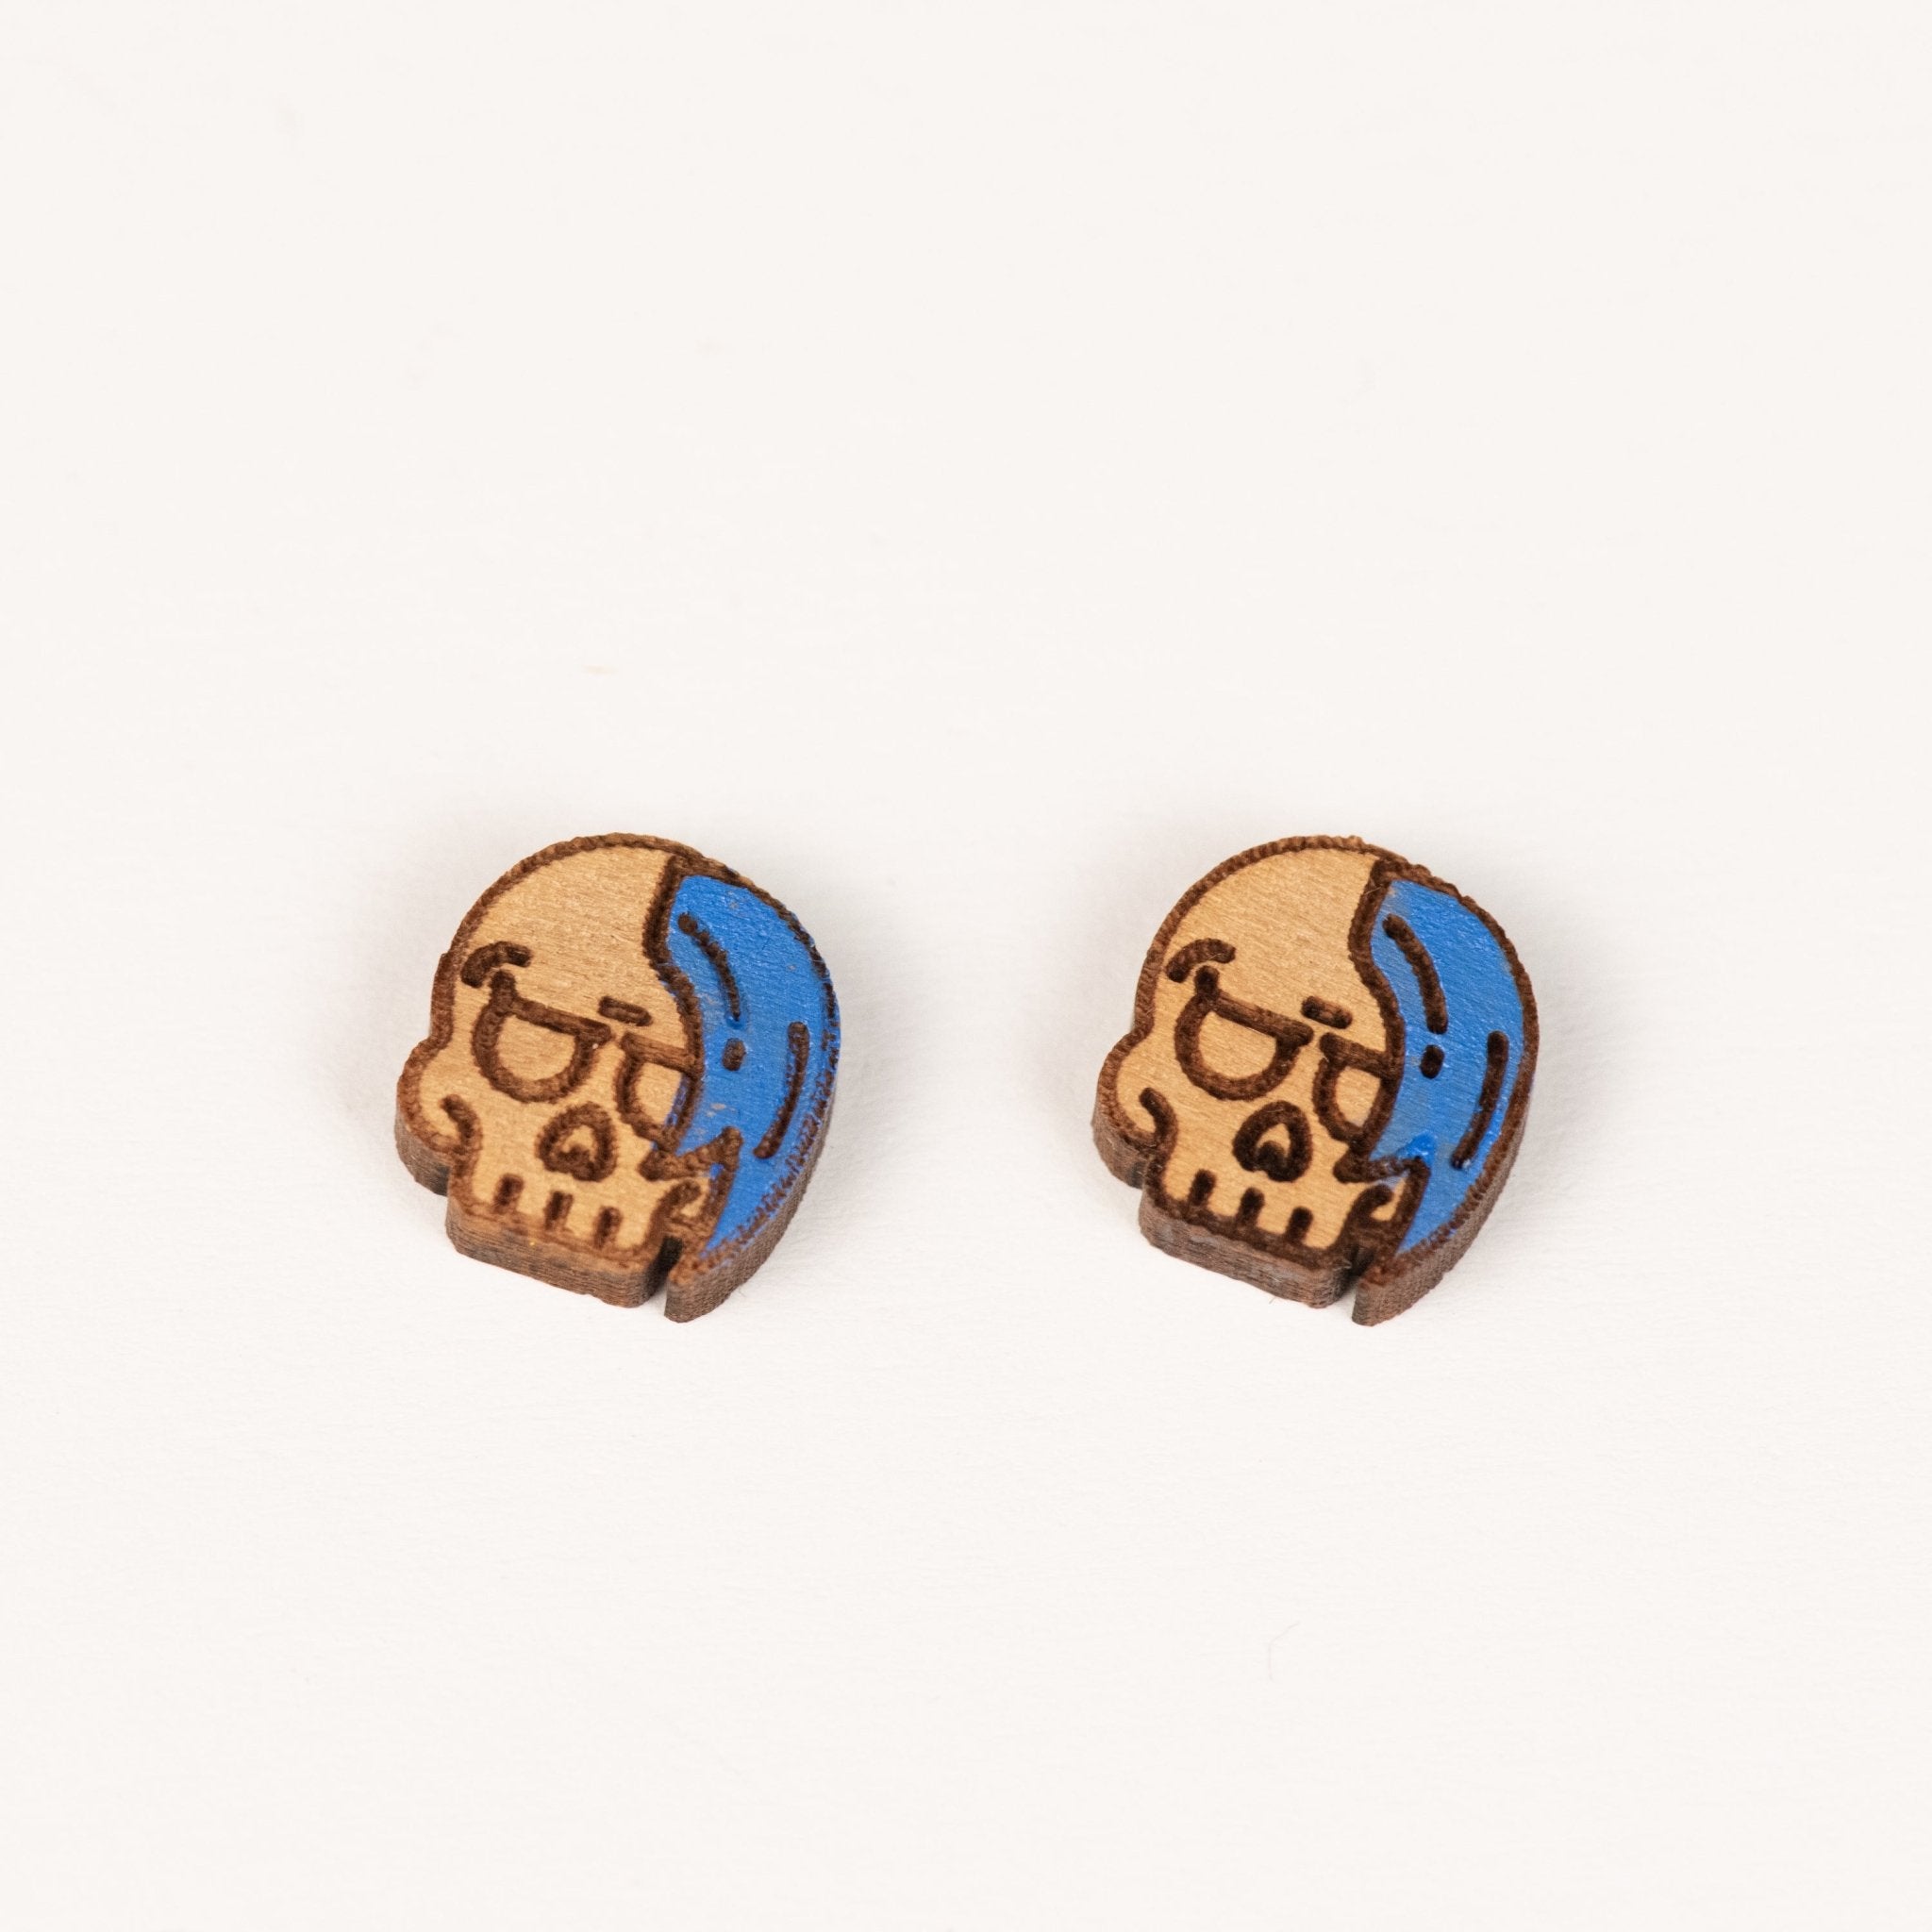 Punk Skull Painted Cherry Wood Stud Earrings - PET15162 - Robin Valley Official Store